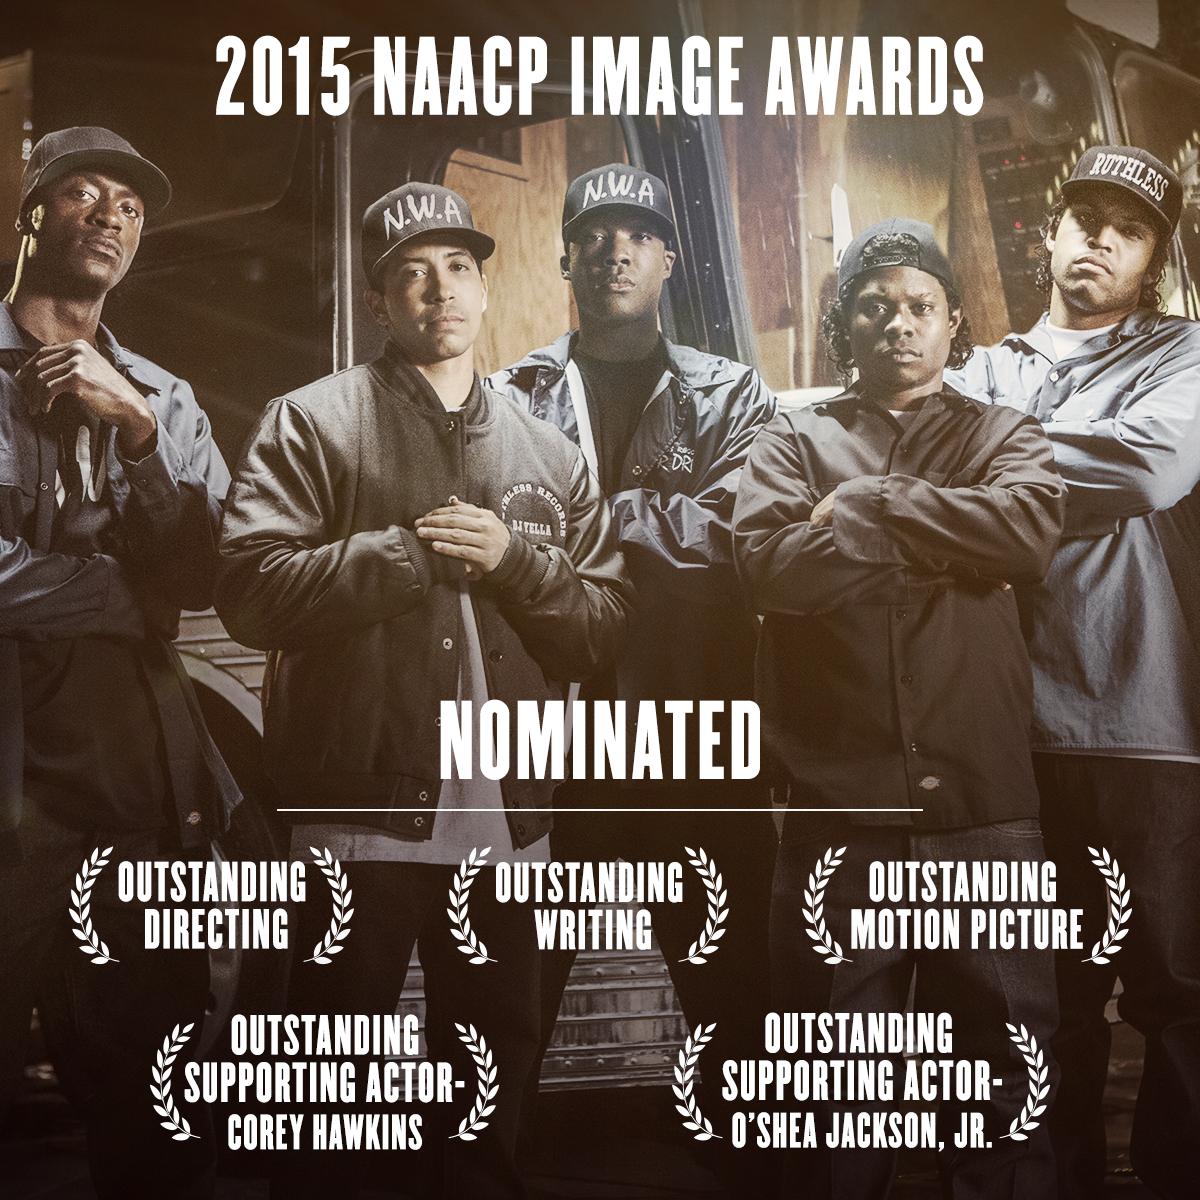 More nominations for #StraightOuttaCompton! @naacpimageaward https://t.co/dgUy9GO5rP